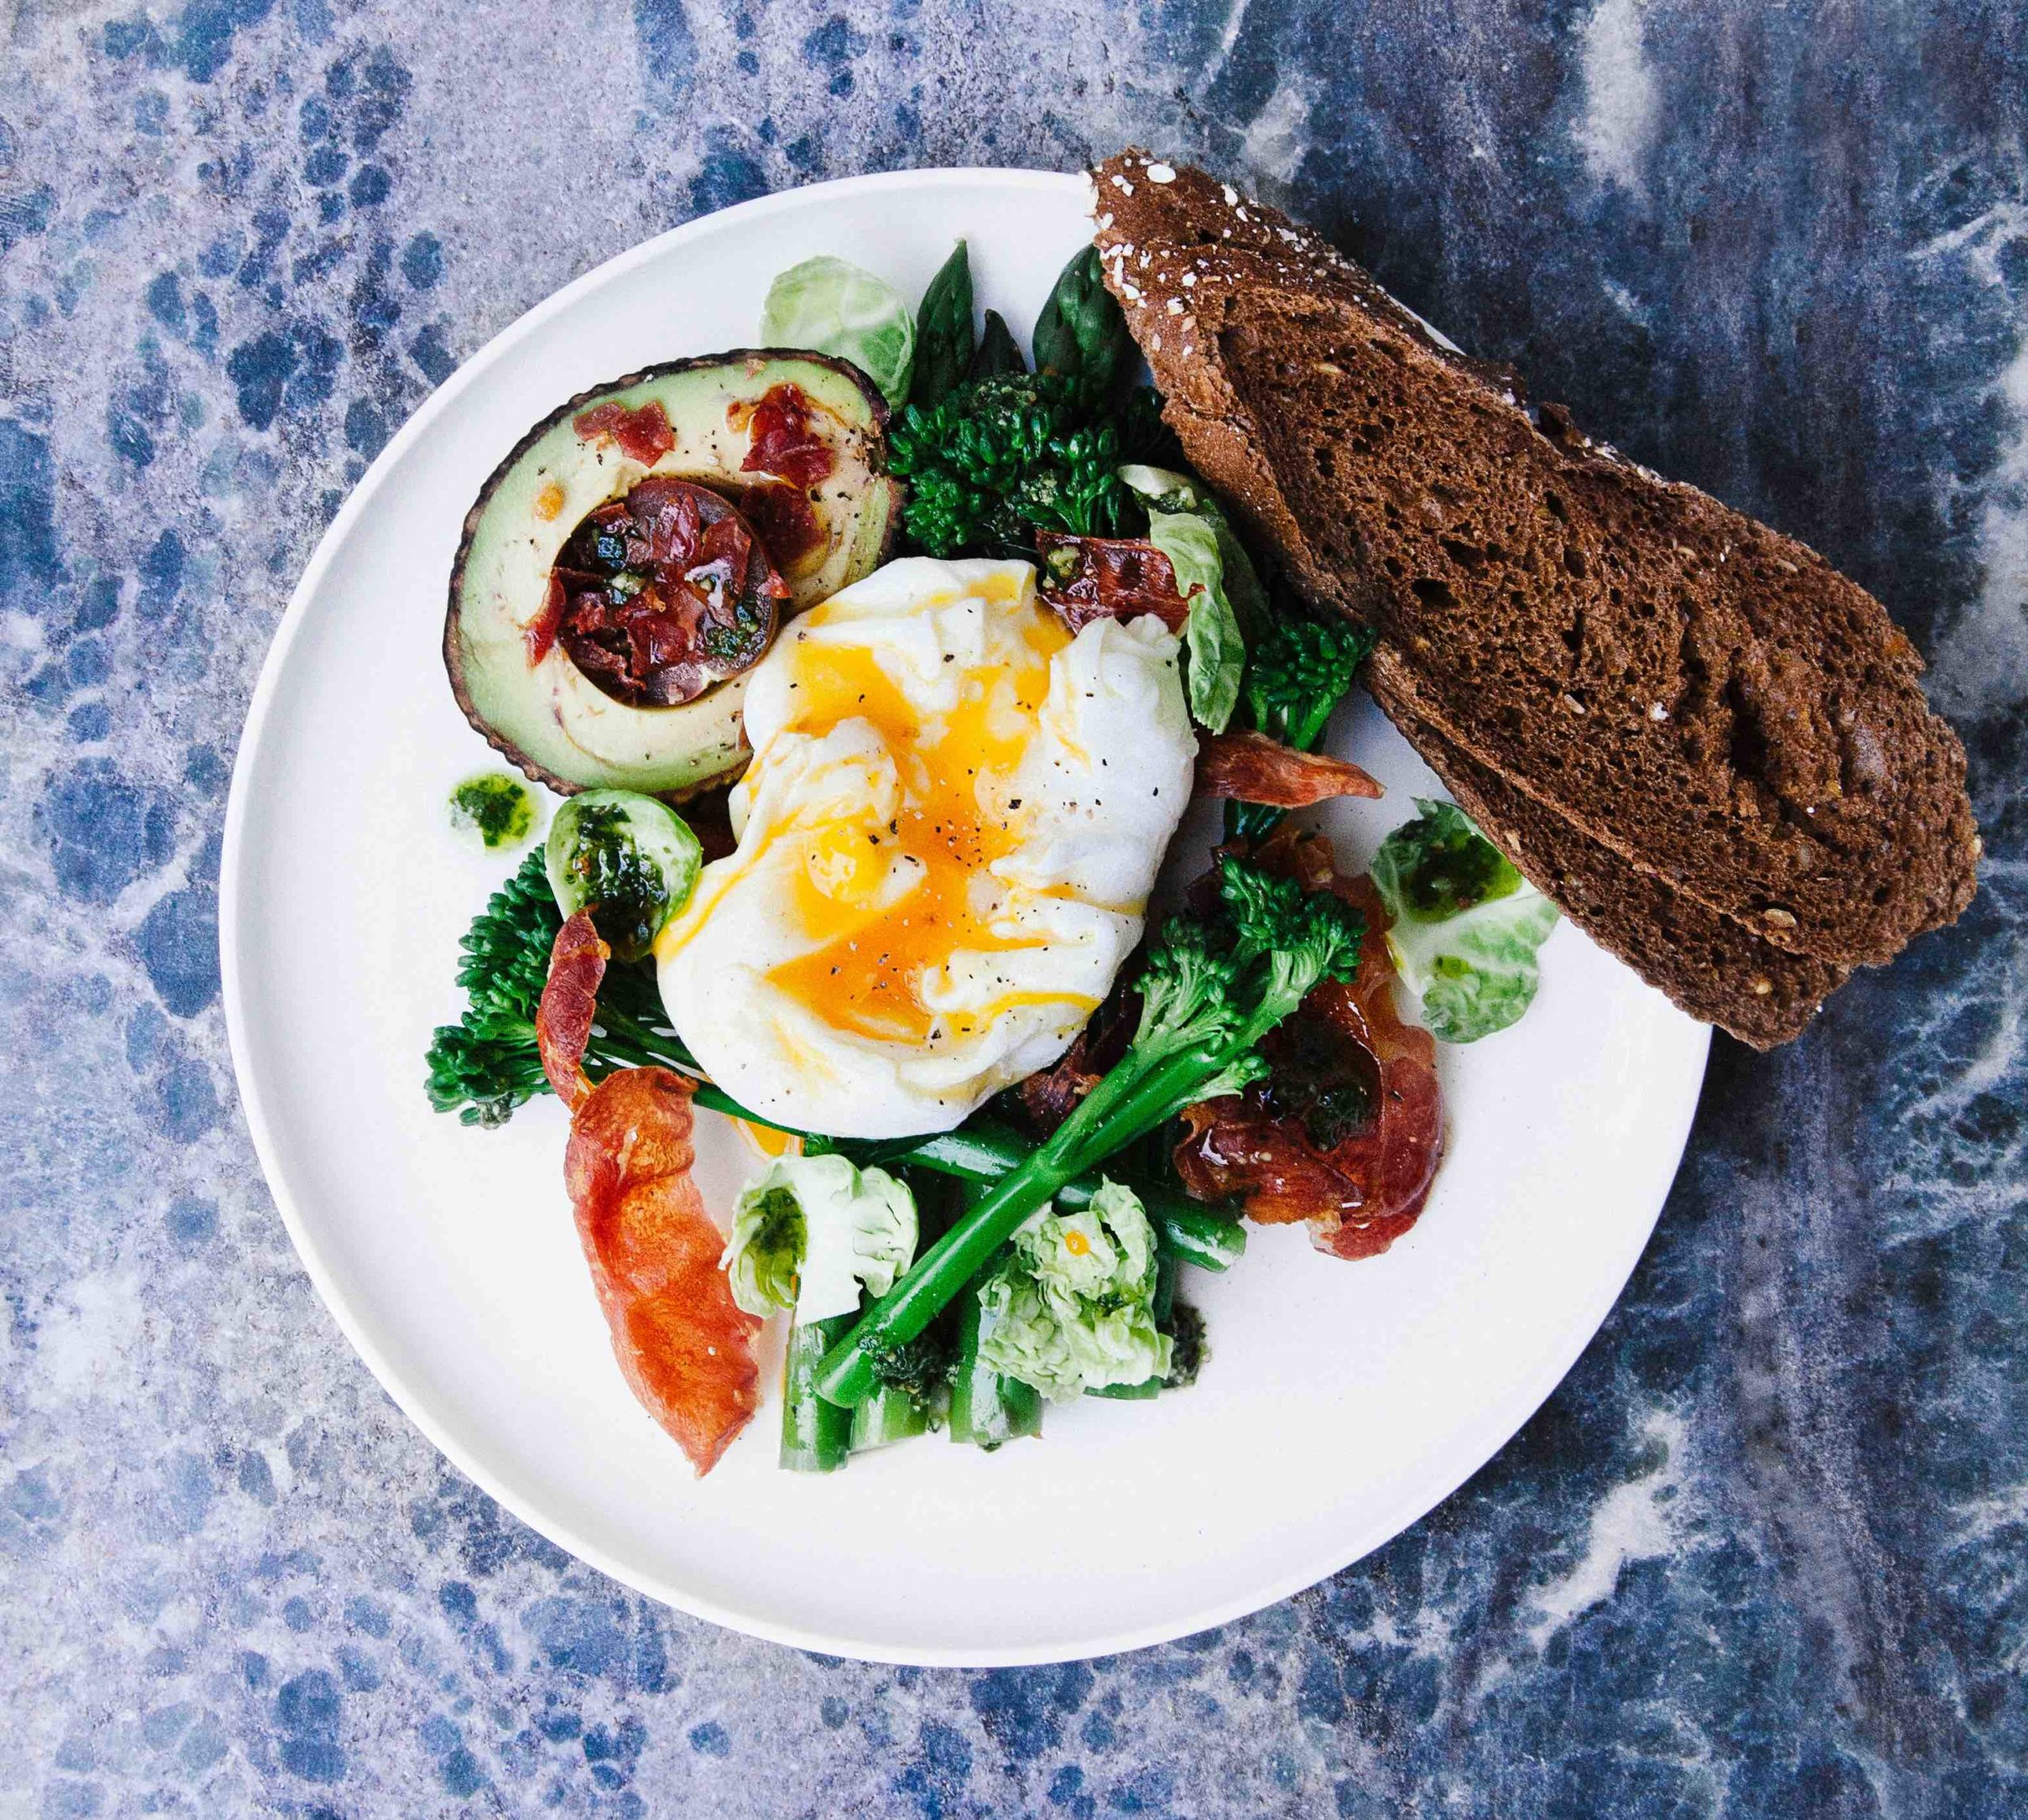 An open soft boiled egg on vegetables with avocado and toast